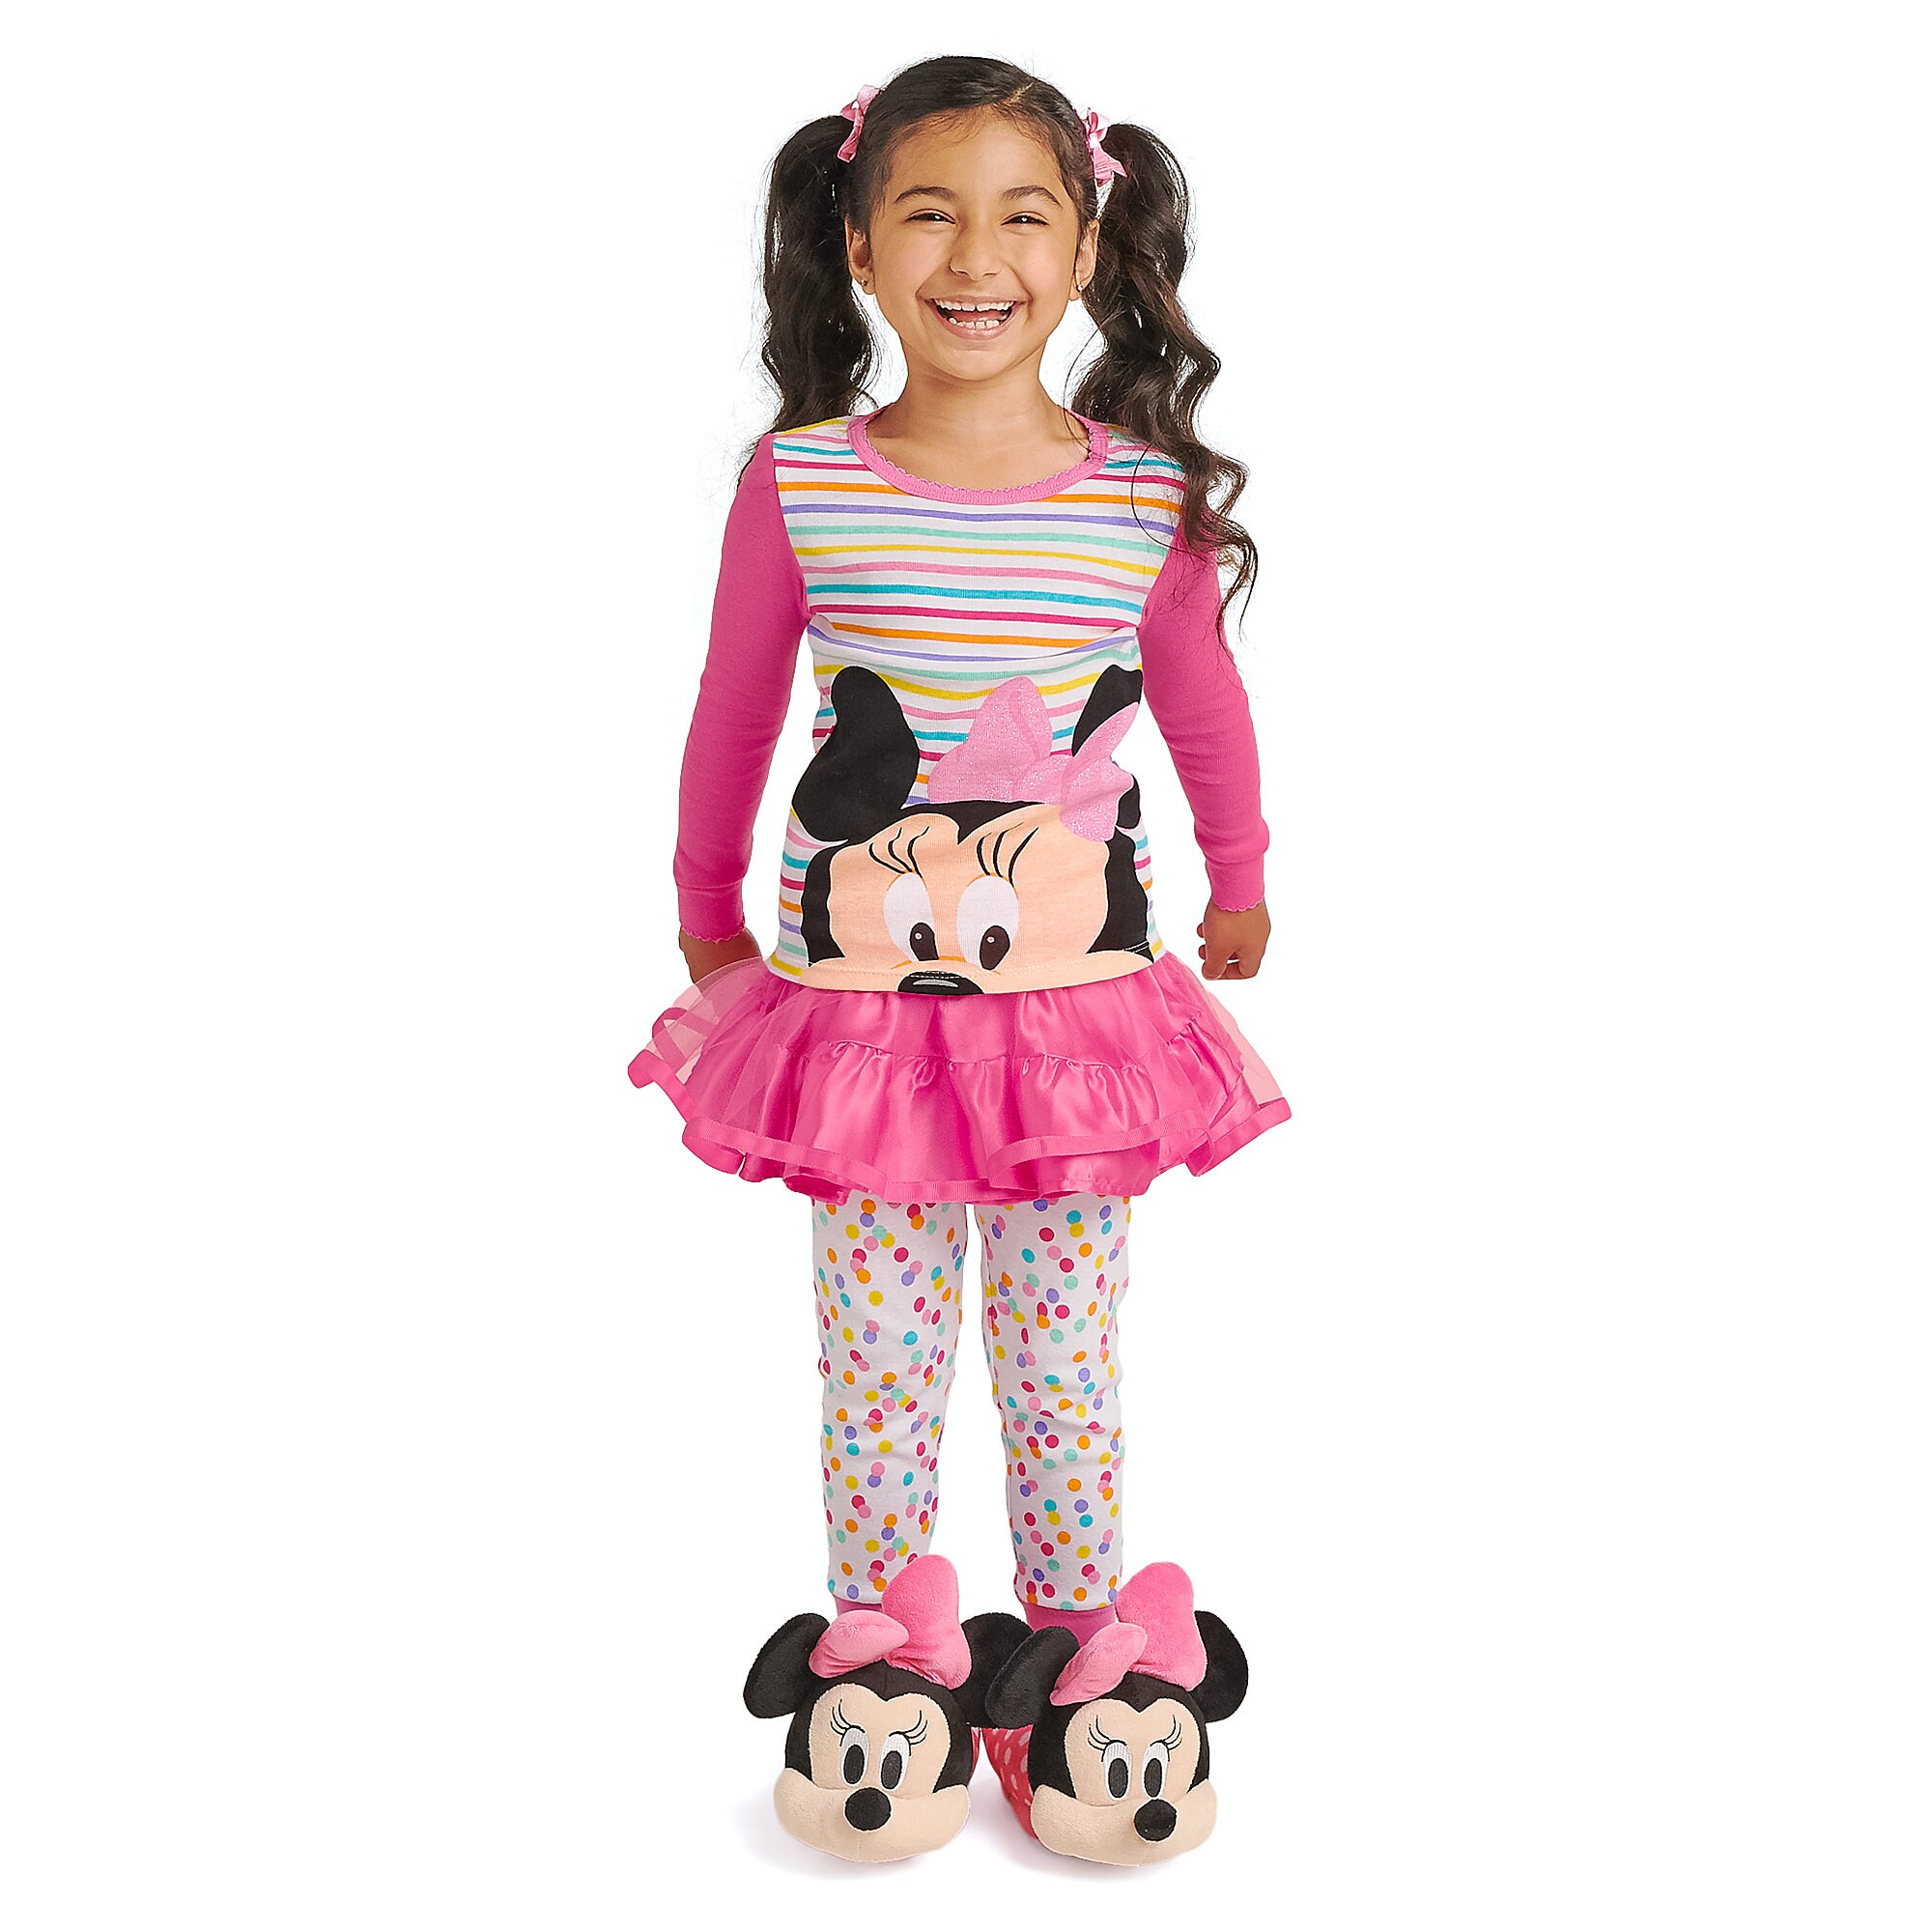 Minnie Mouse PJ PALS Set for Girls